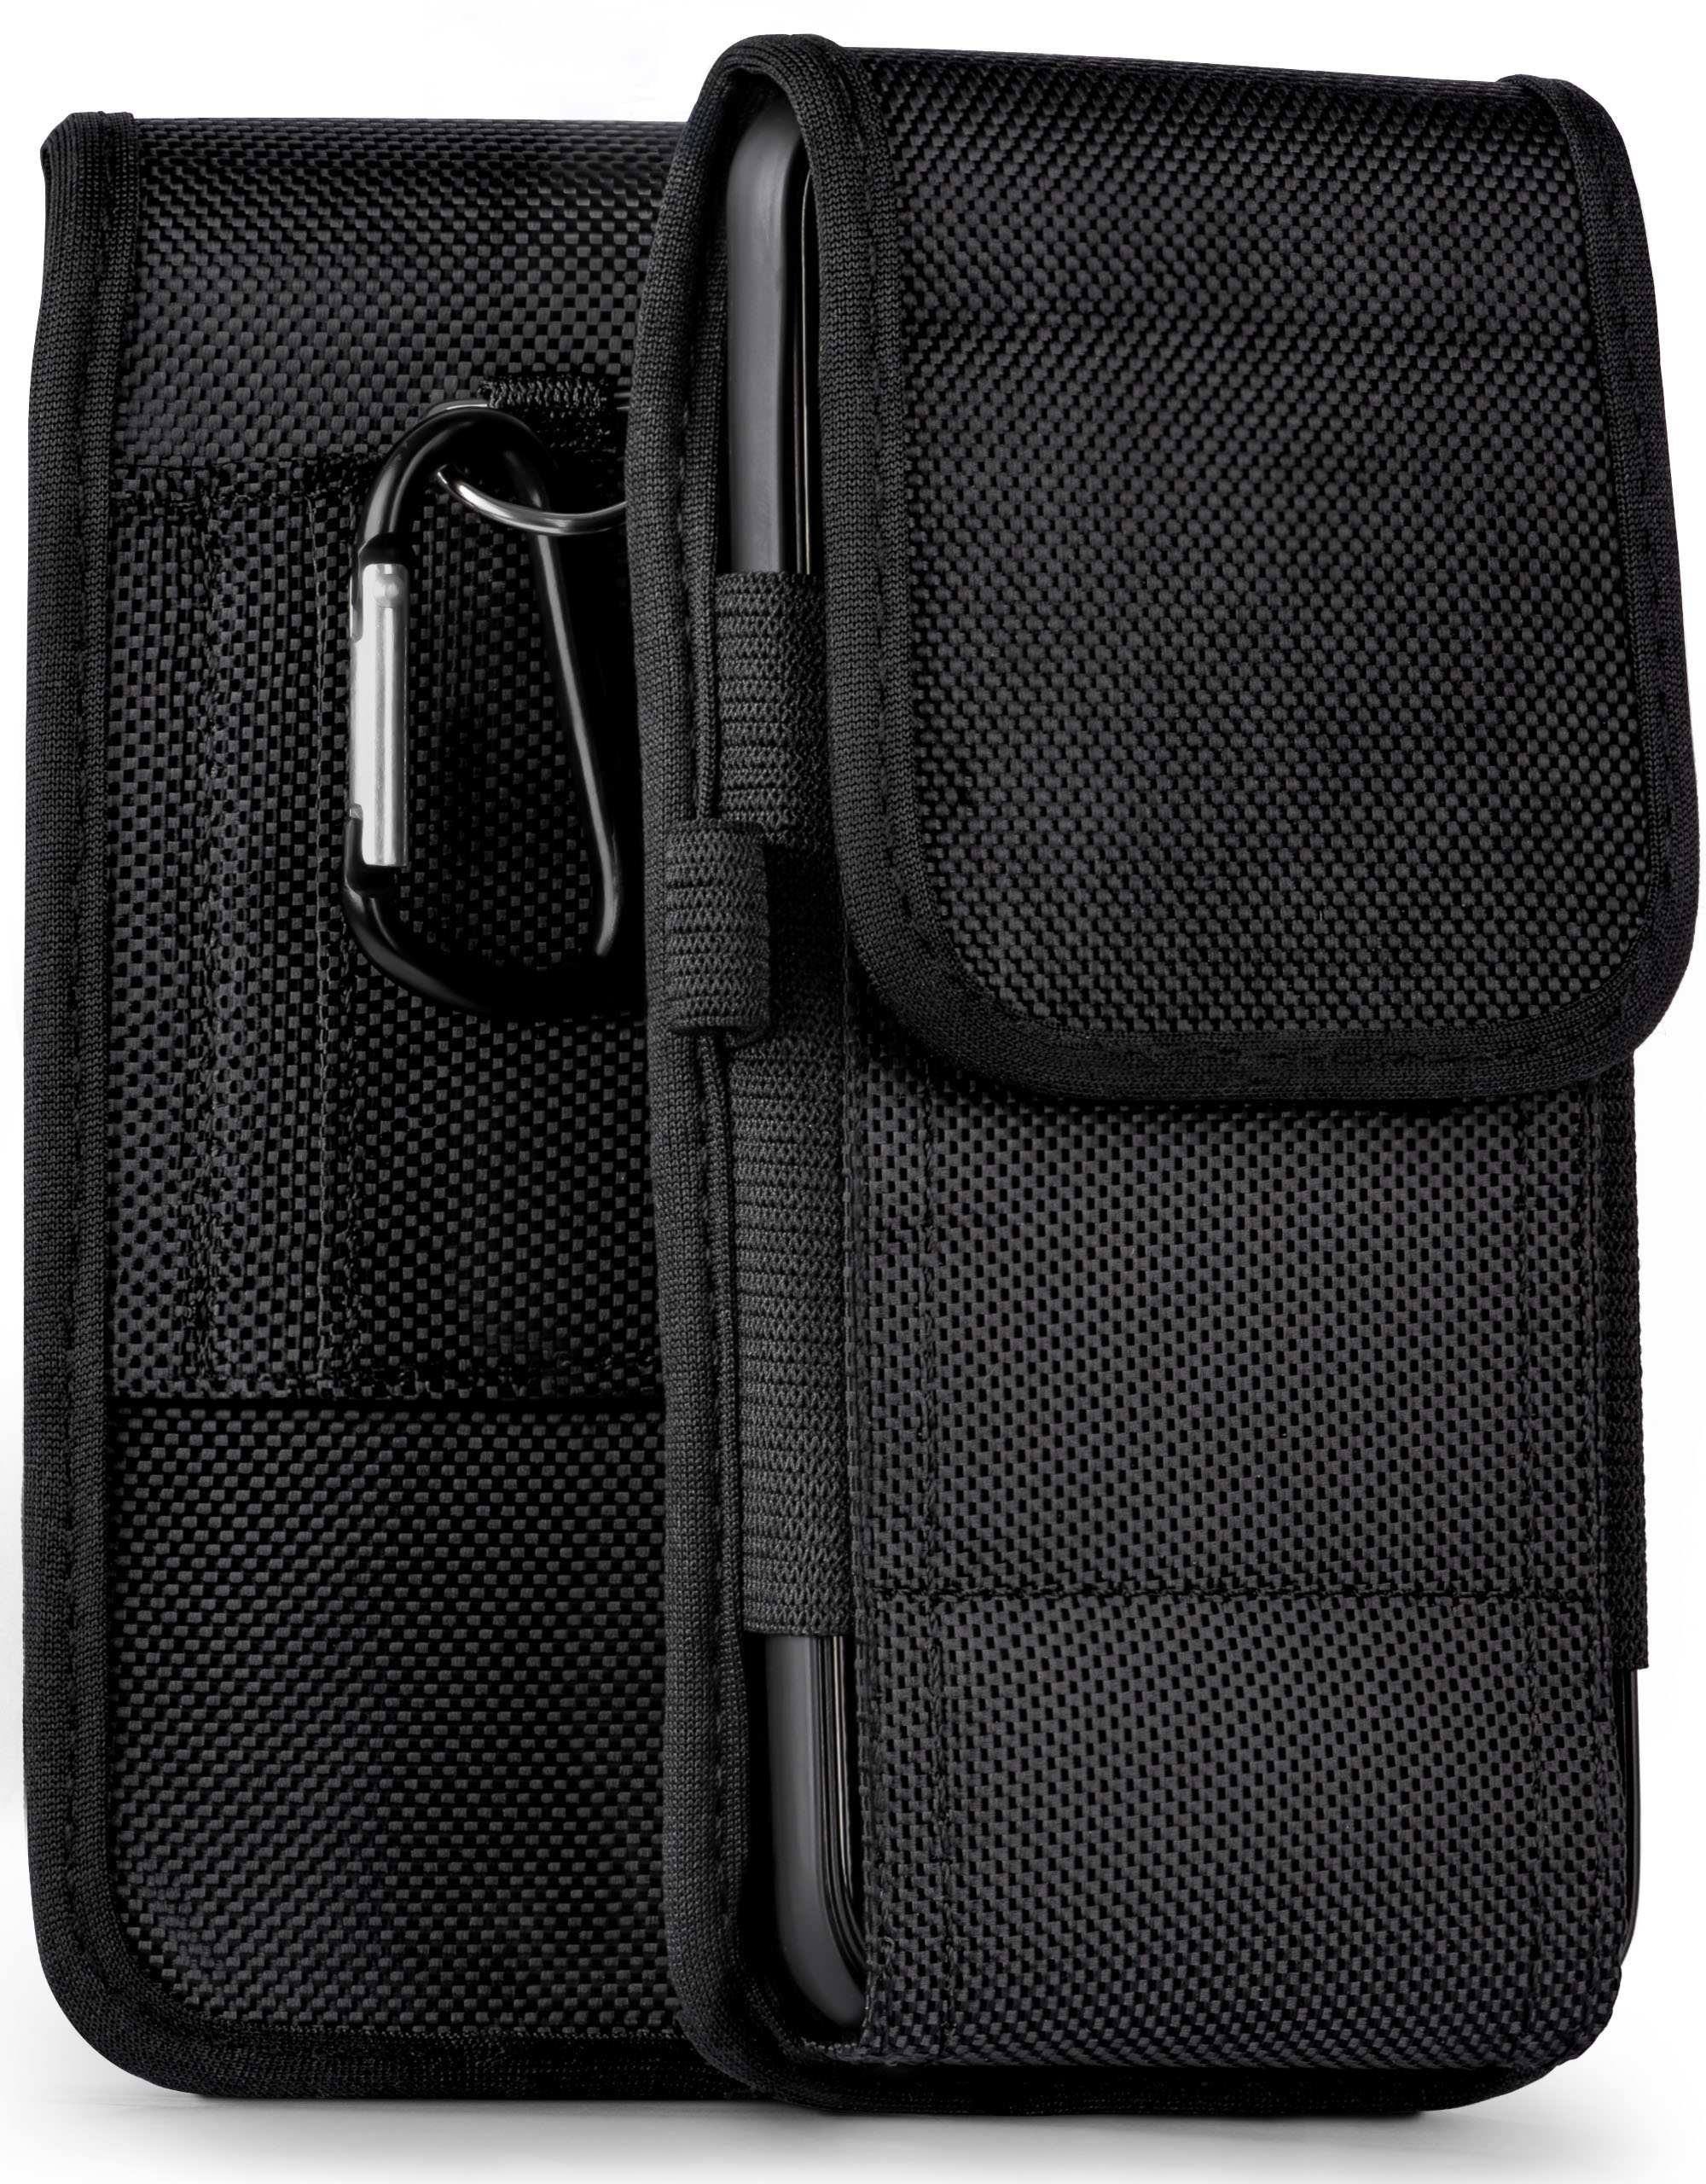 MOEX Case, Honor Huawei, Agility 6A, Holster, Trail